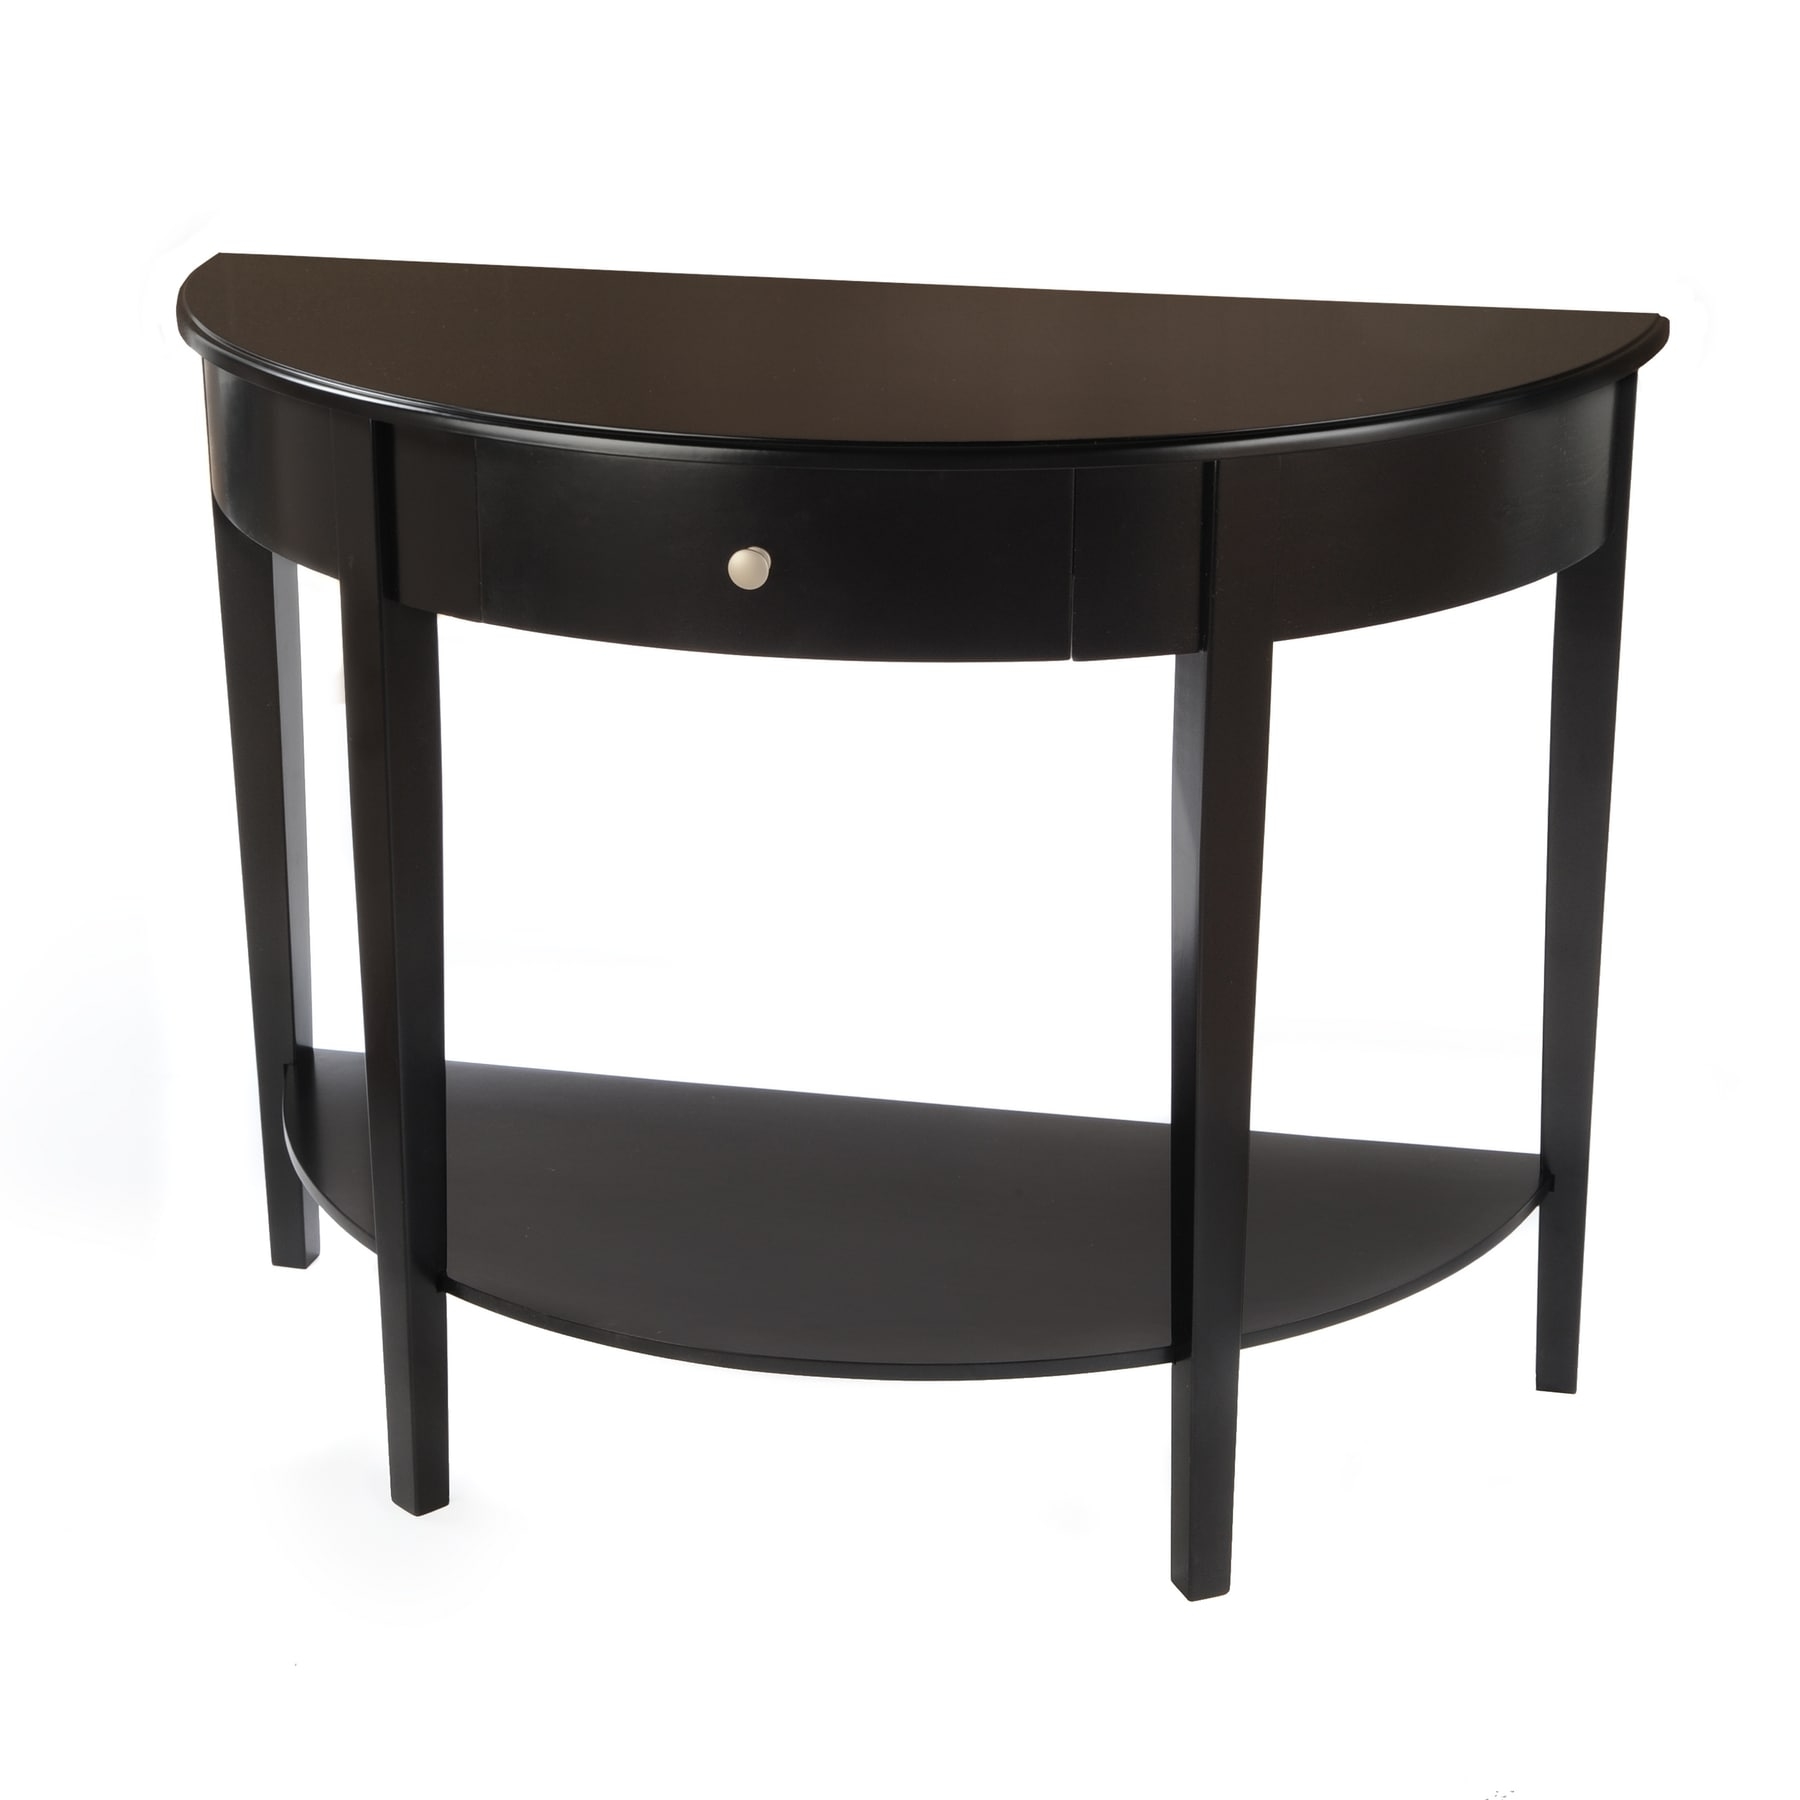 Bianco collection large black half round table